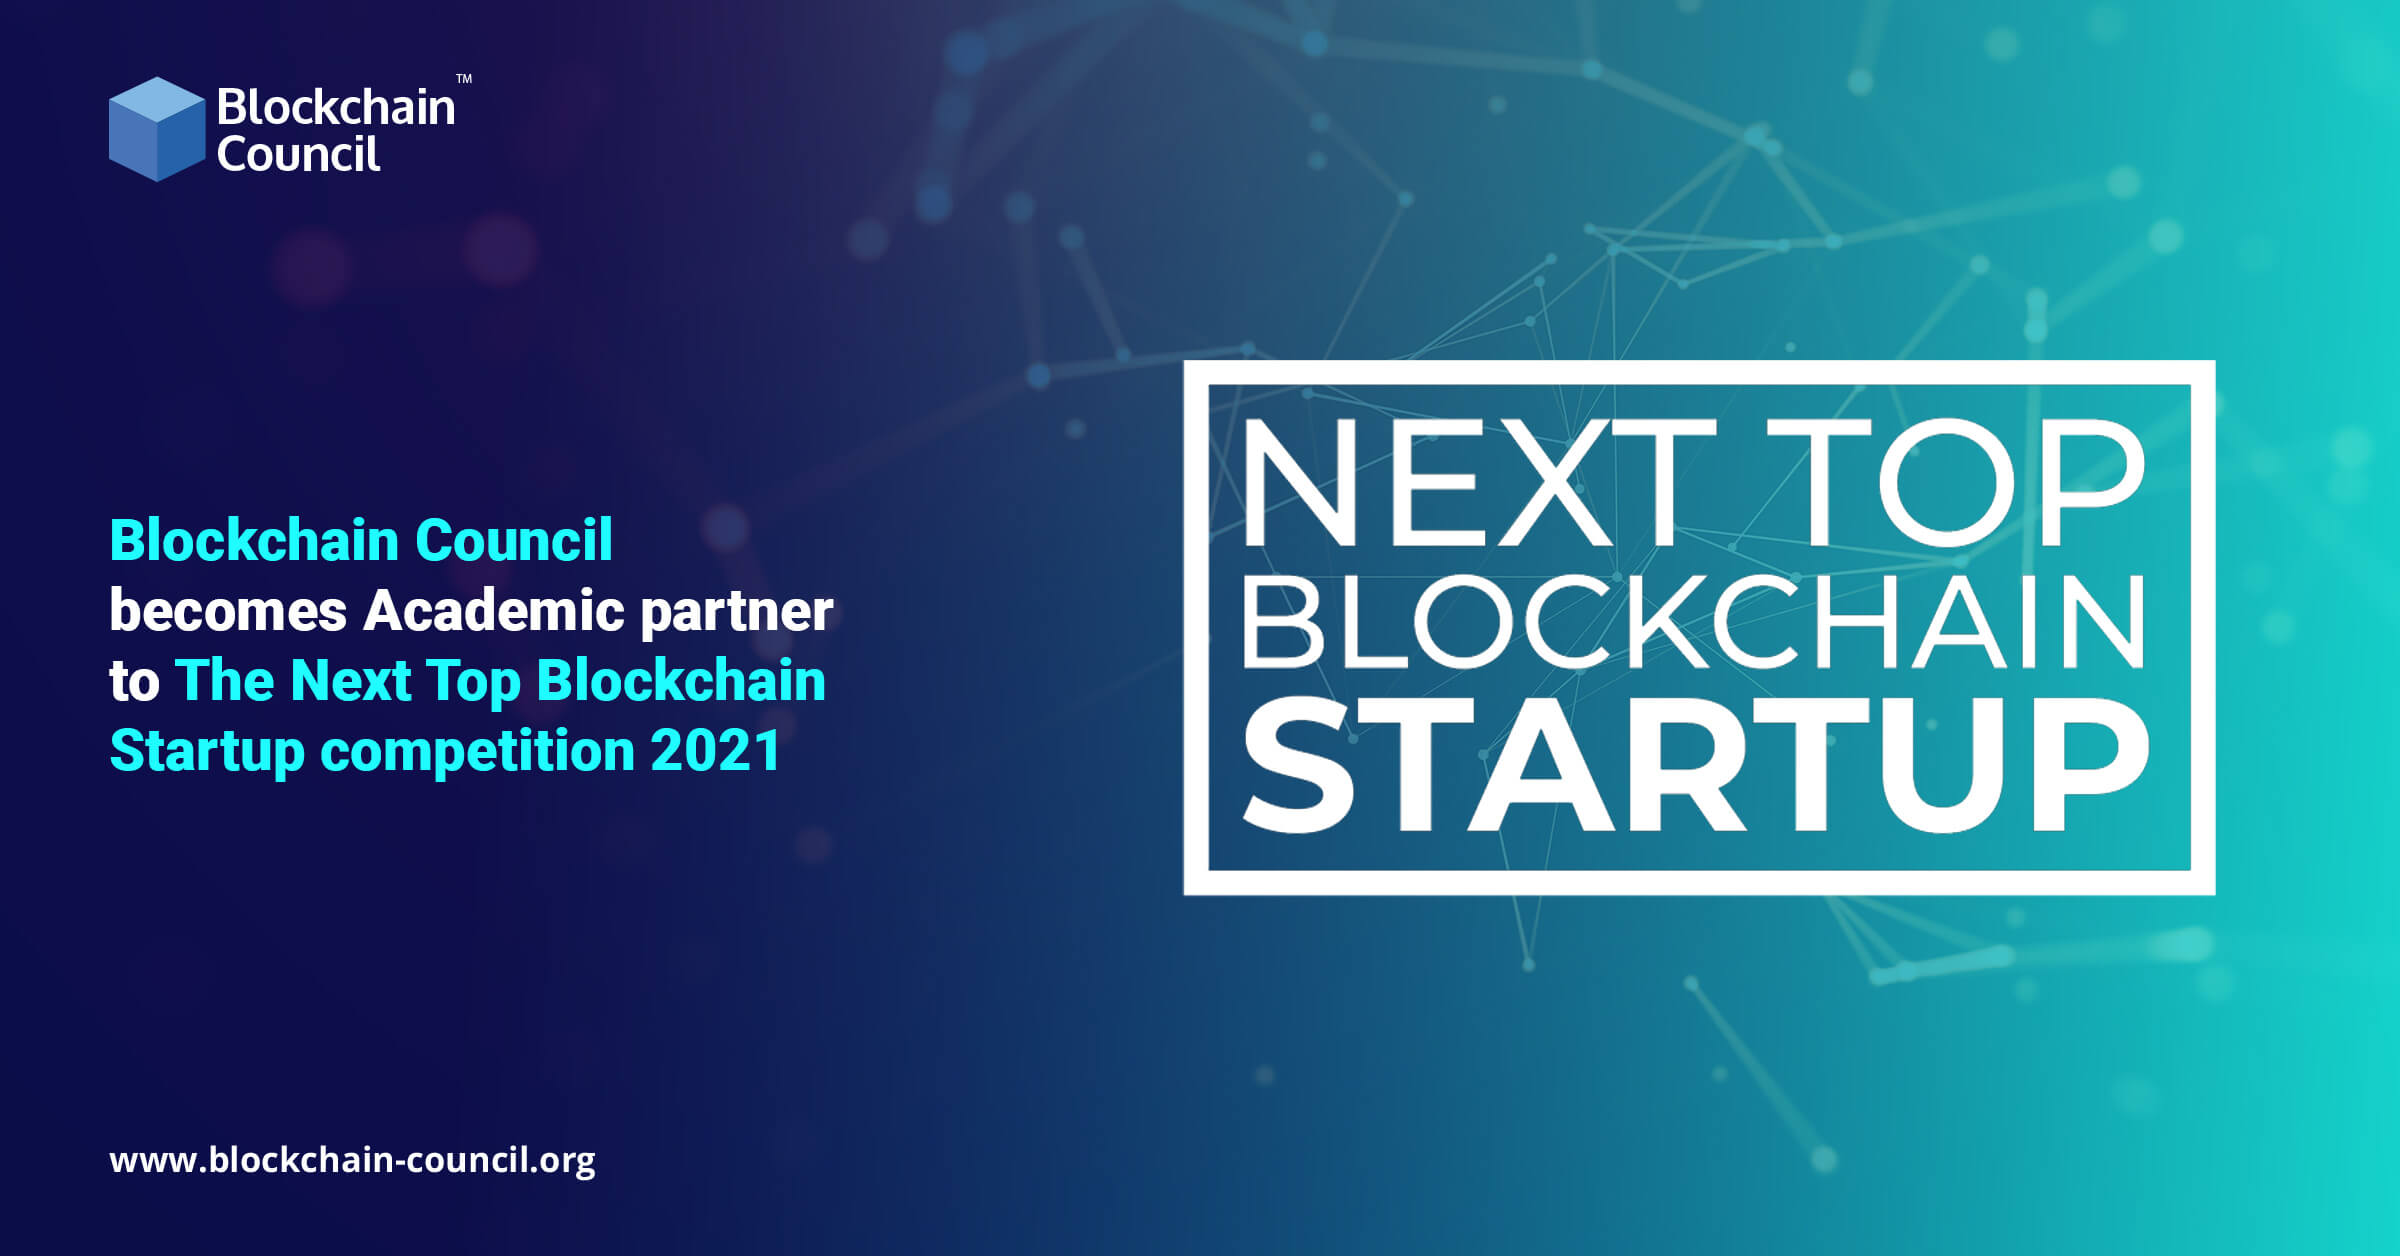 Blockchain Council becomes Academic partner to The Next Top Blockchain Startup competition 2021